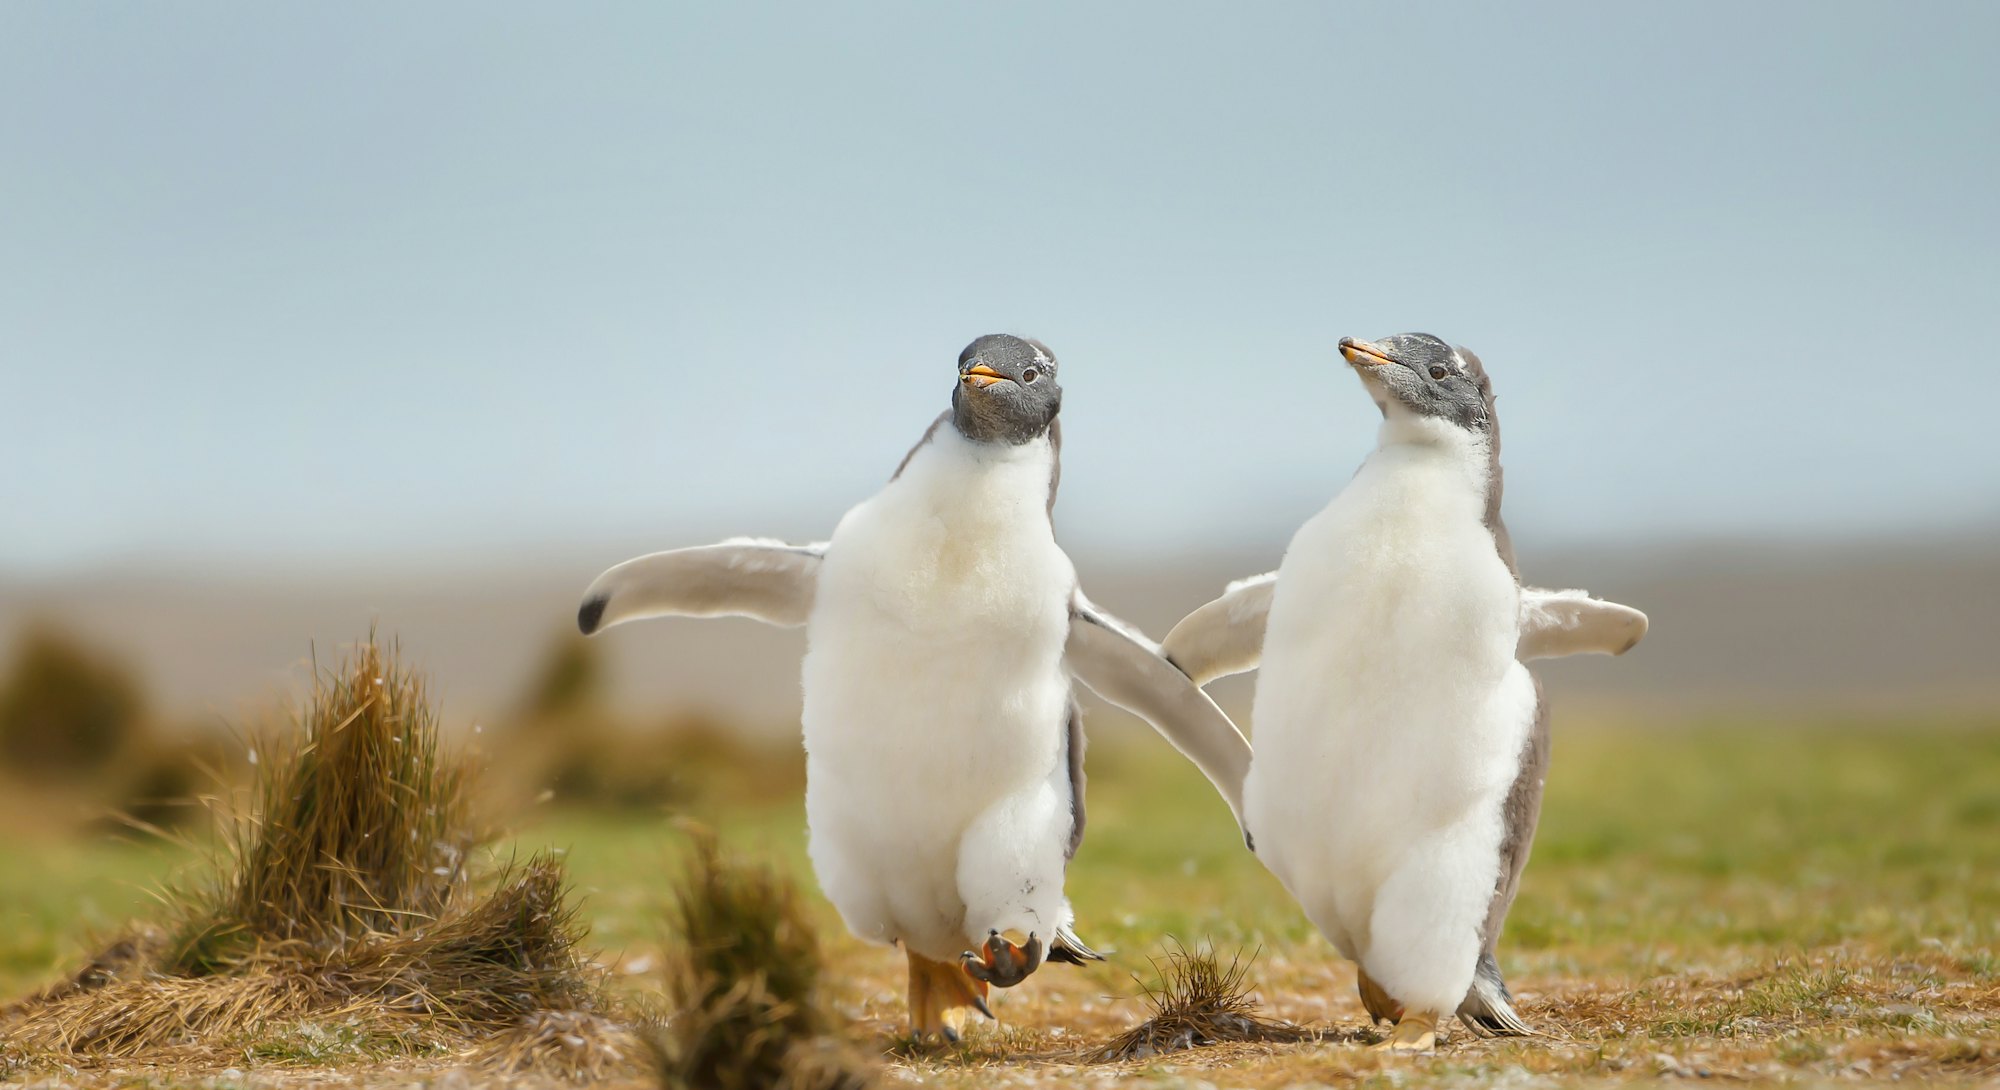 Two young gentoo penguin chicks happily running on the grass field in the Falkland islands.  Wildlif...